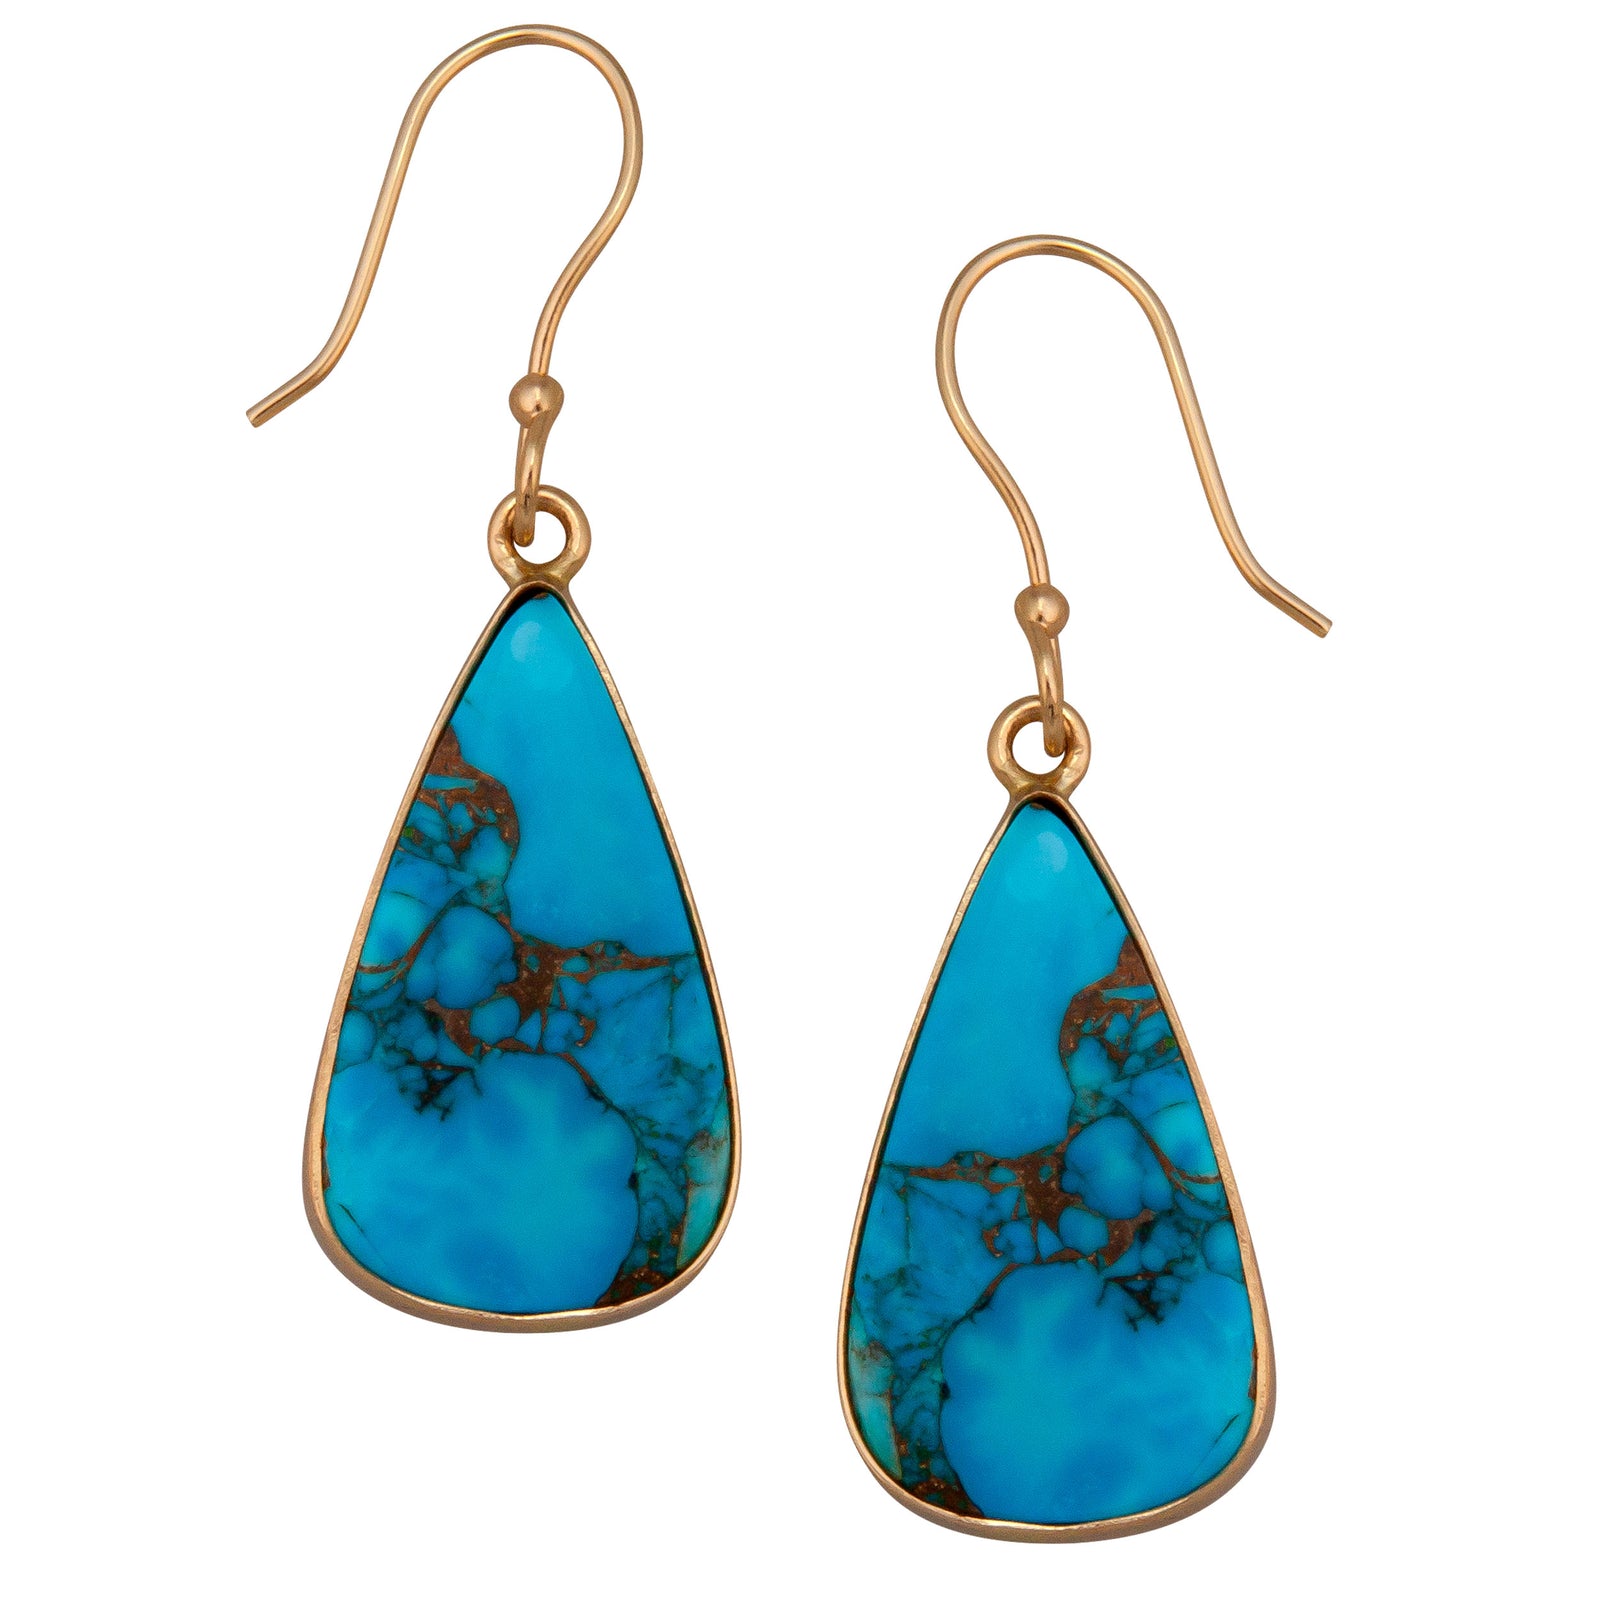 Alchemia Copper Infused Turquoise Earrings | Charles Albert Jewelry